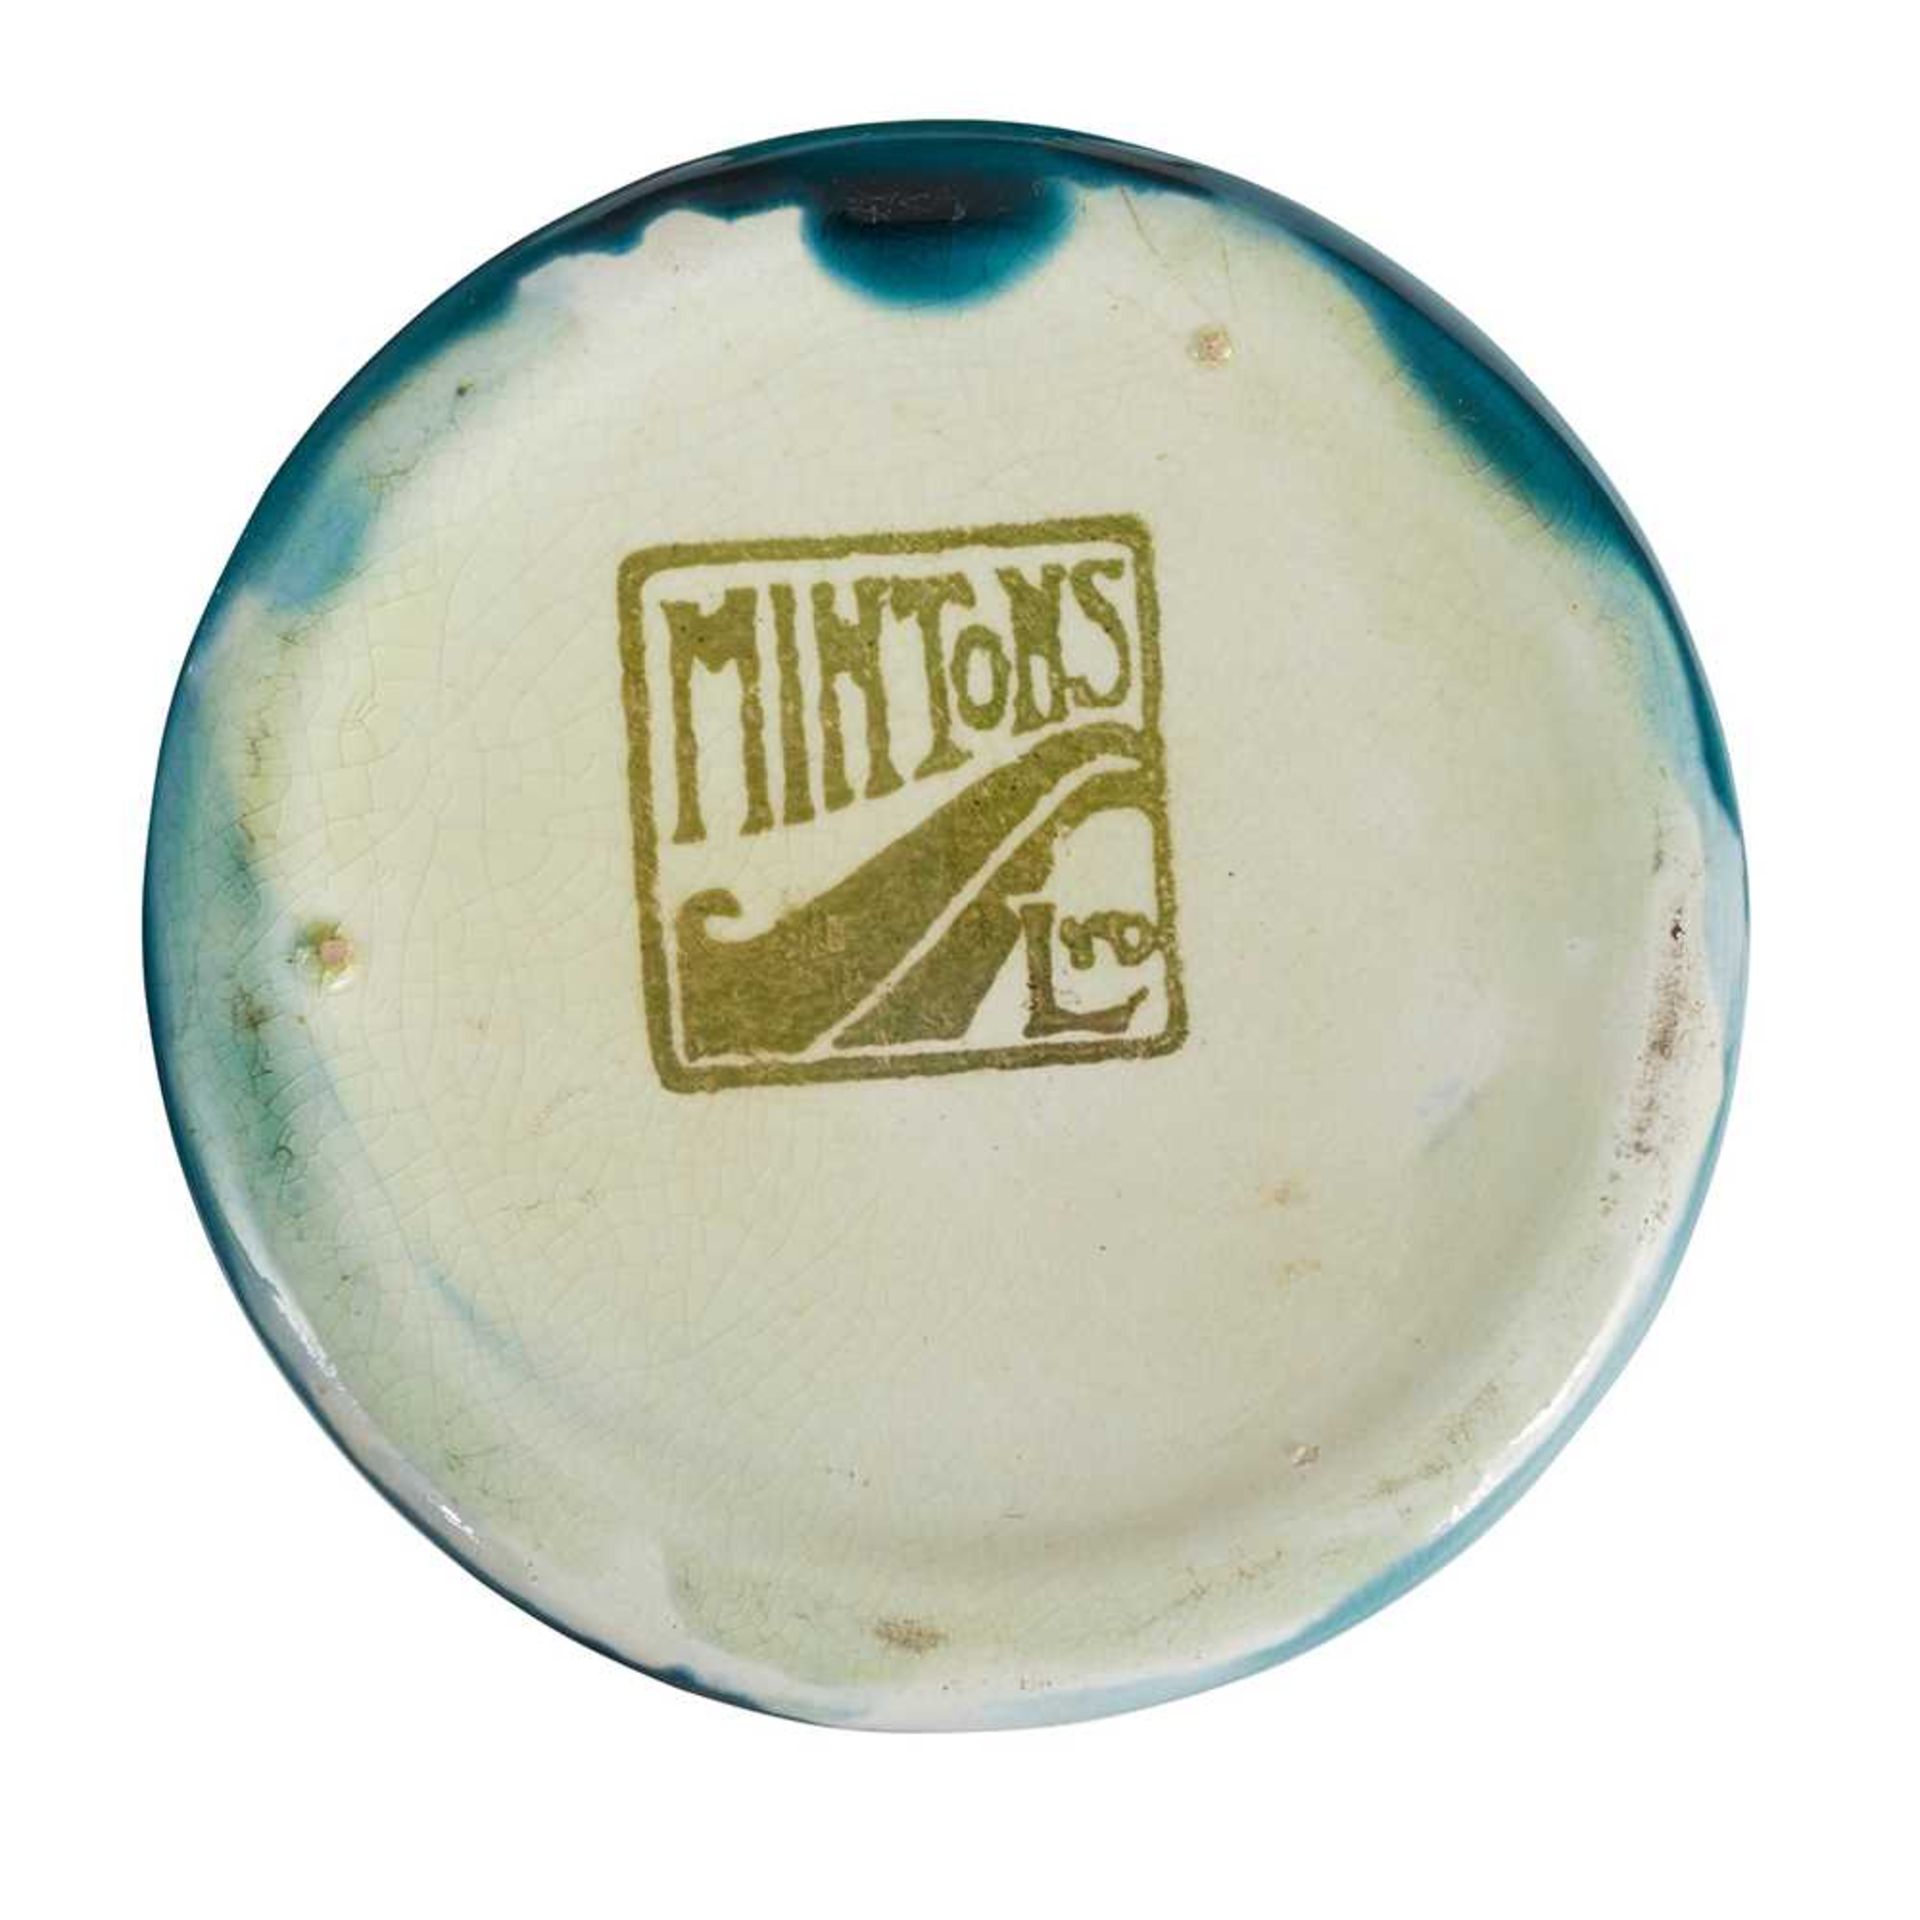 MINTONS LTD. NEAR PAIR OF ‘SECESSIONIST WARE’ VASE, 1902 - Image 5 of 8